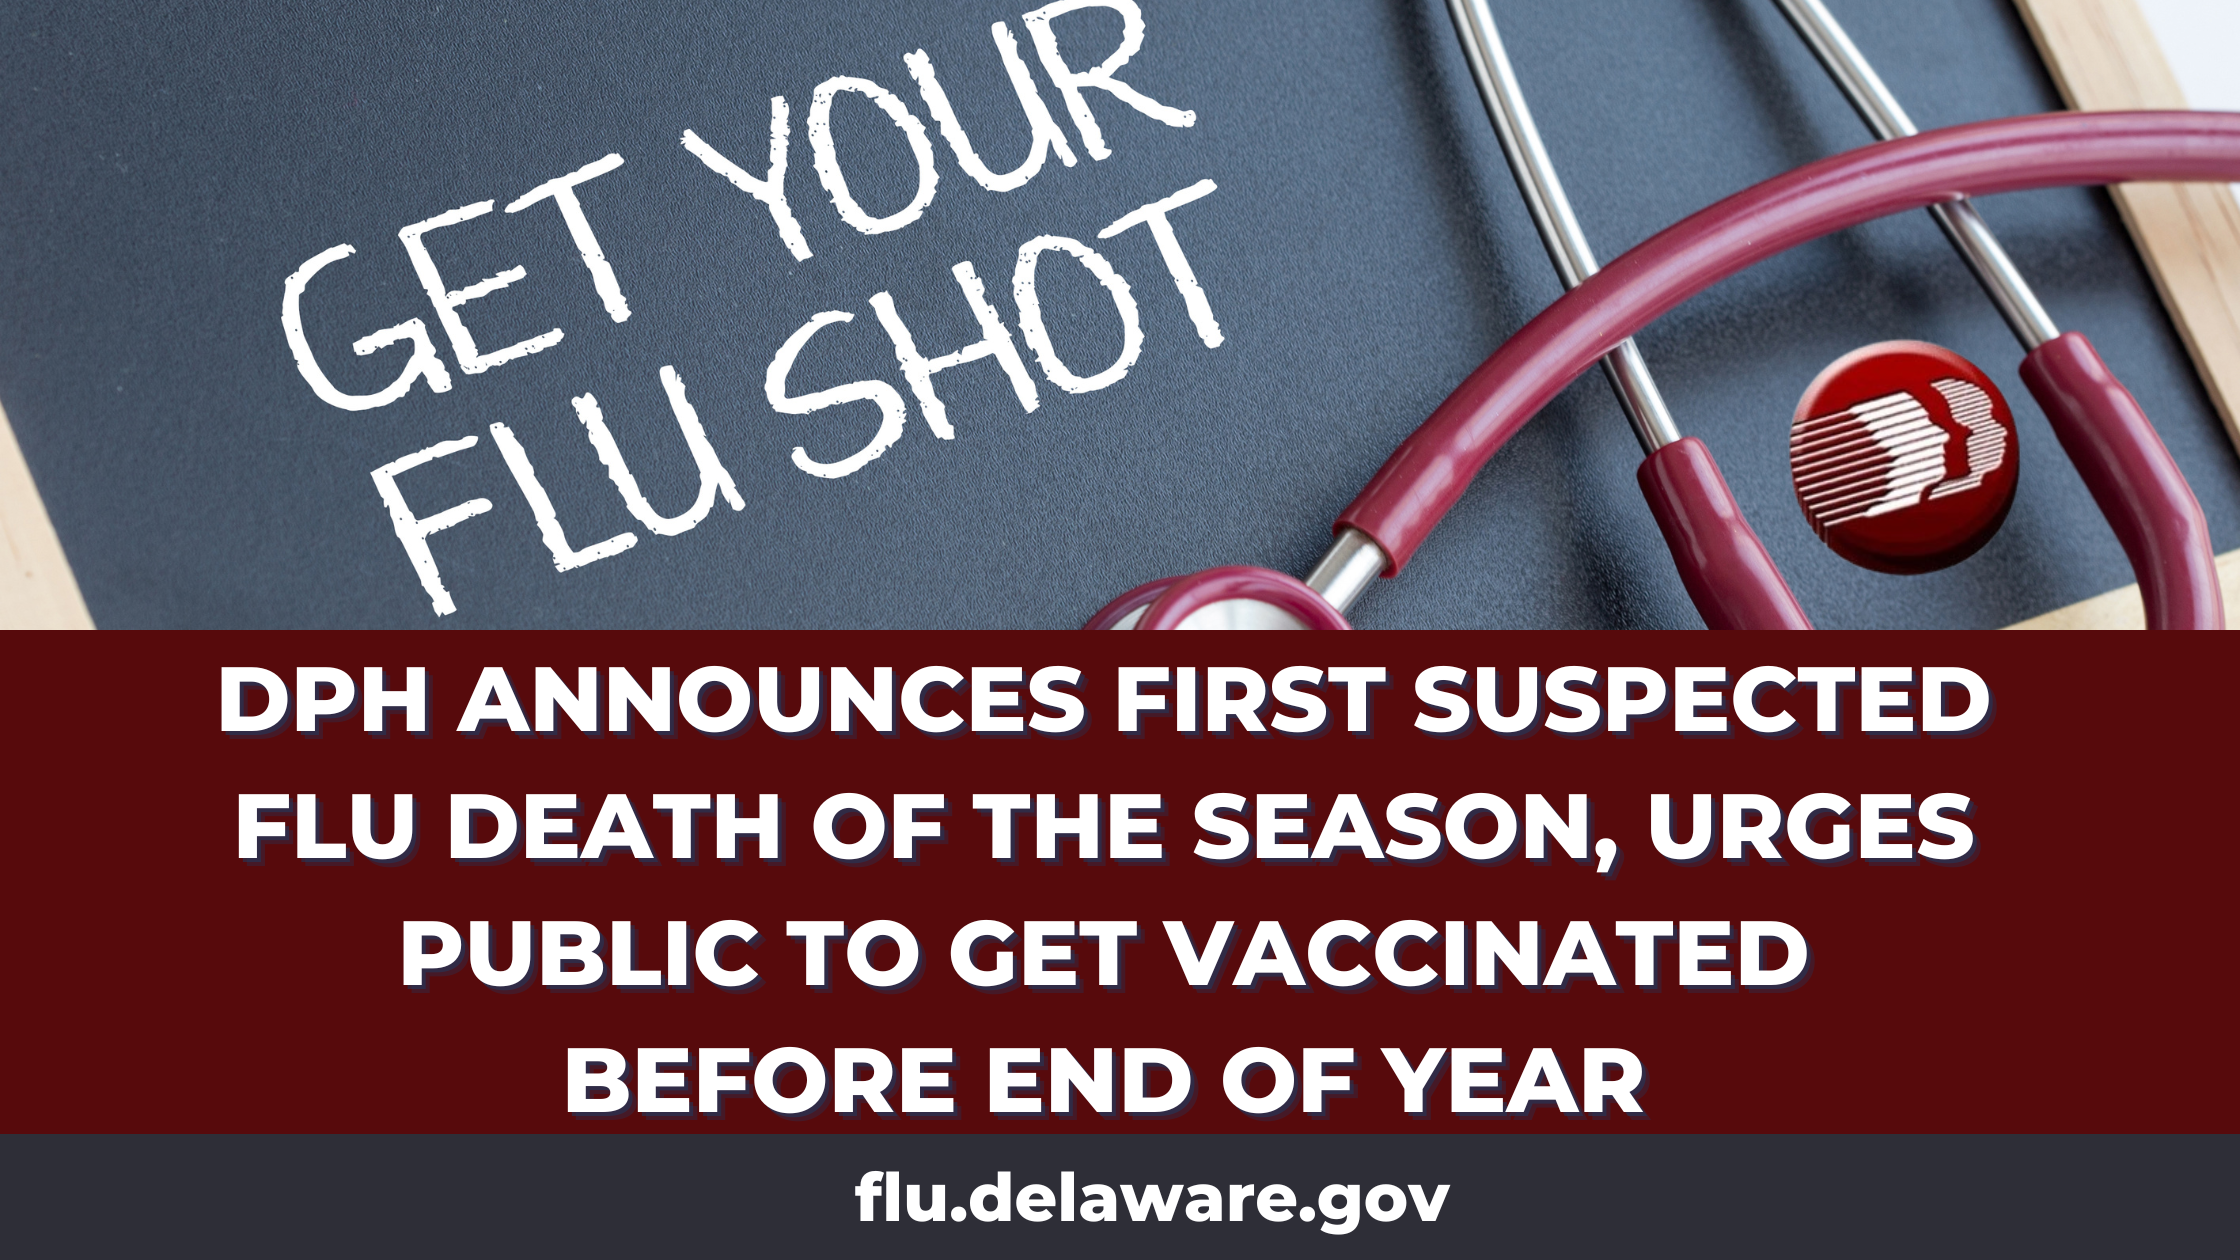 DPH ANNOUNCES FIRST SUSPECTED FLU-RELATED DEATH, URGES PUBLIC TO GET VACCINATED BEFORE END OF YEAR